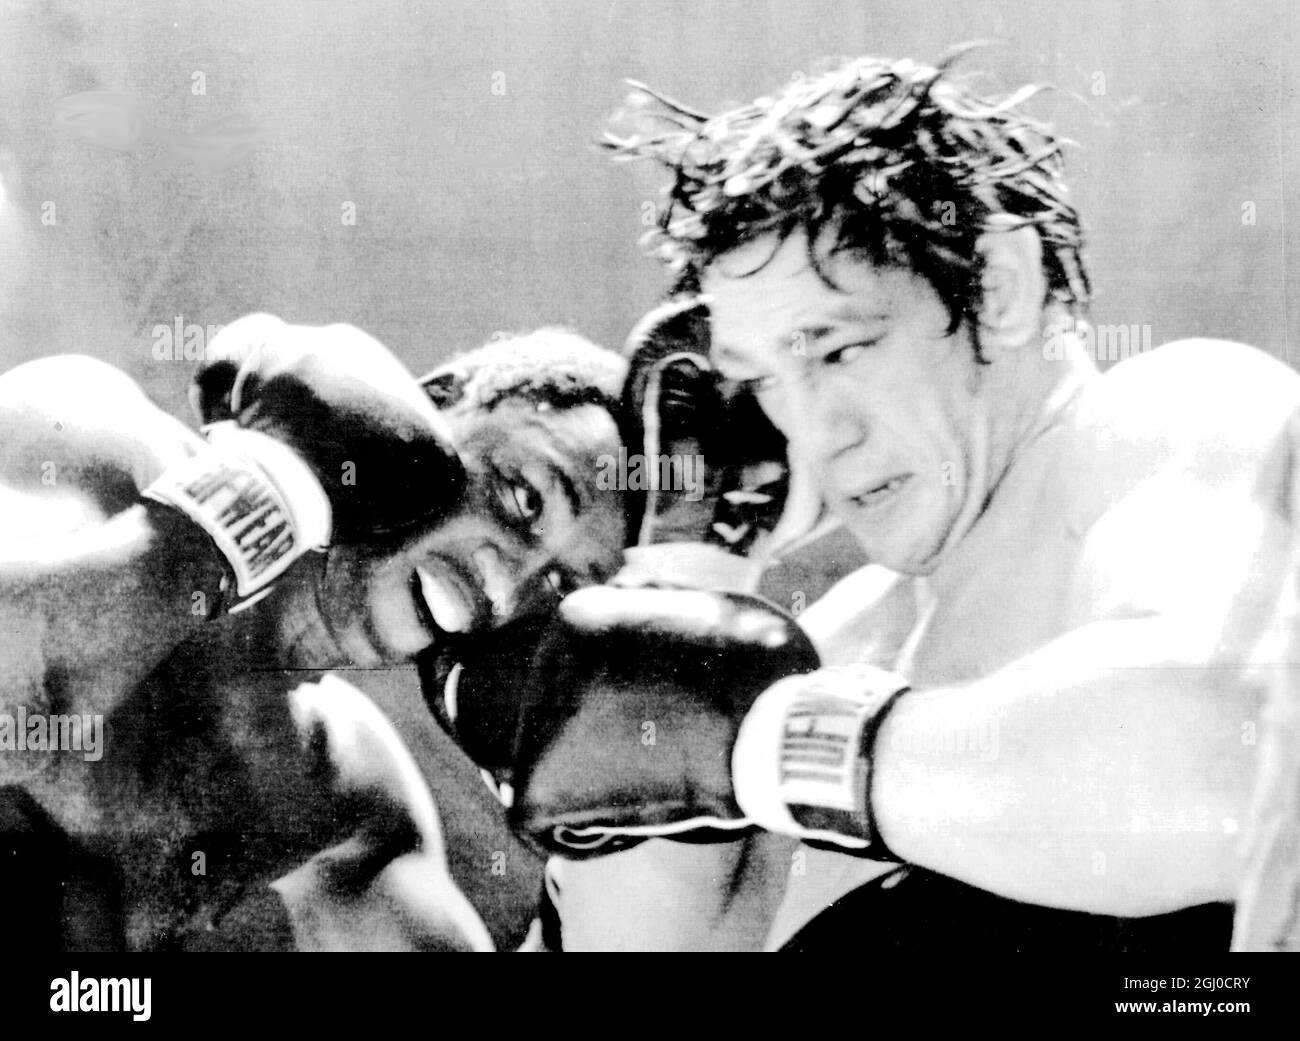 Joe Frazier retains his title, after fifteen rounds in a heavyweight championship fight against Oscar Bonavena. Philadelphia - 11th December 1968 Stock Photo